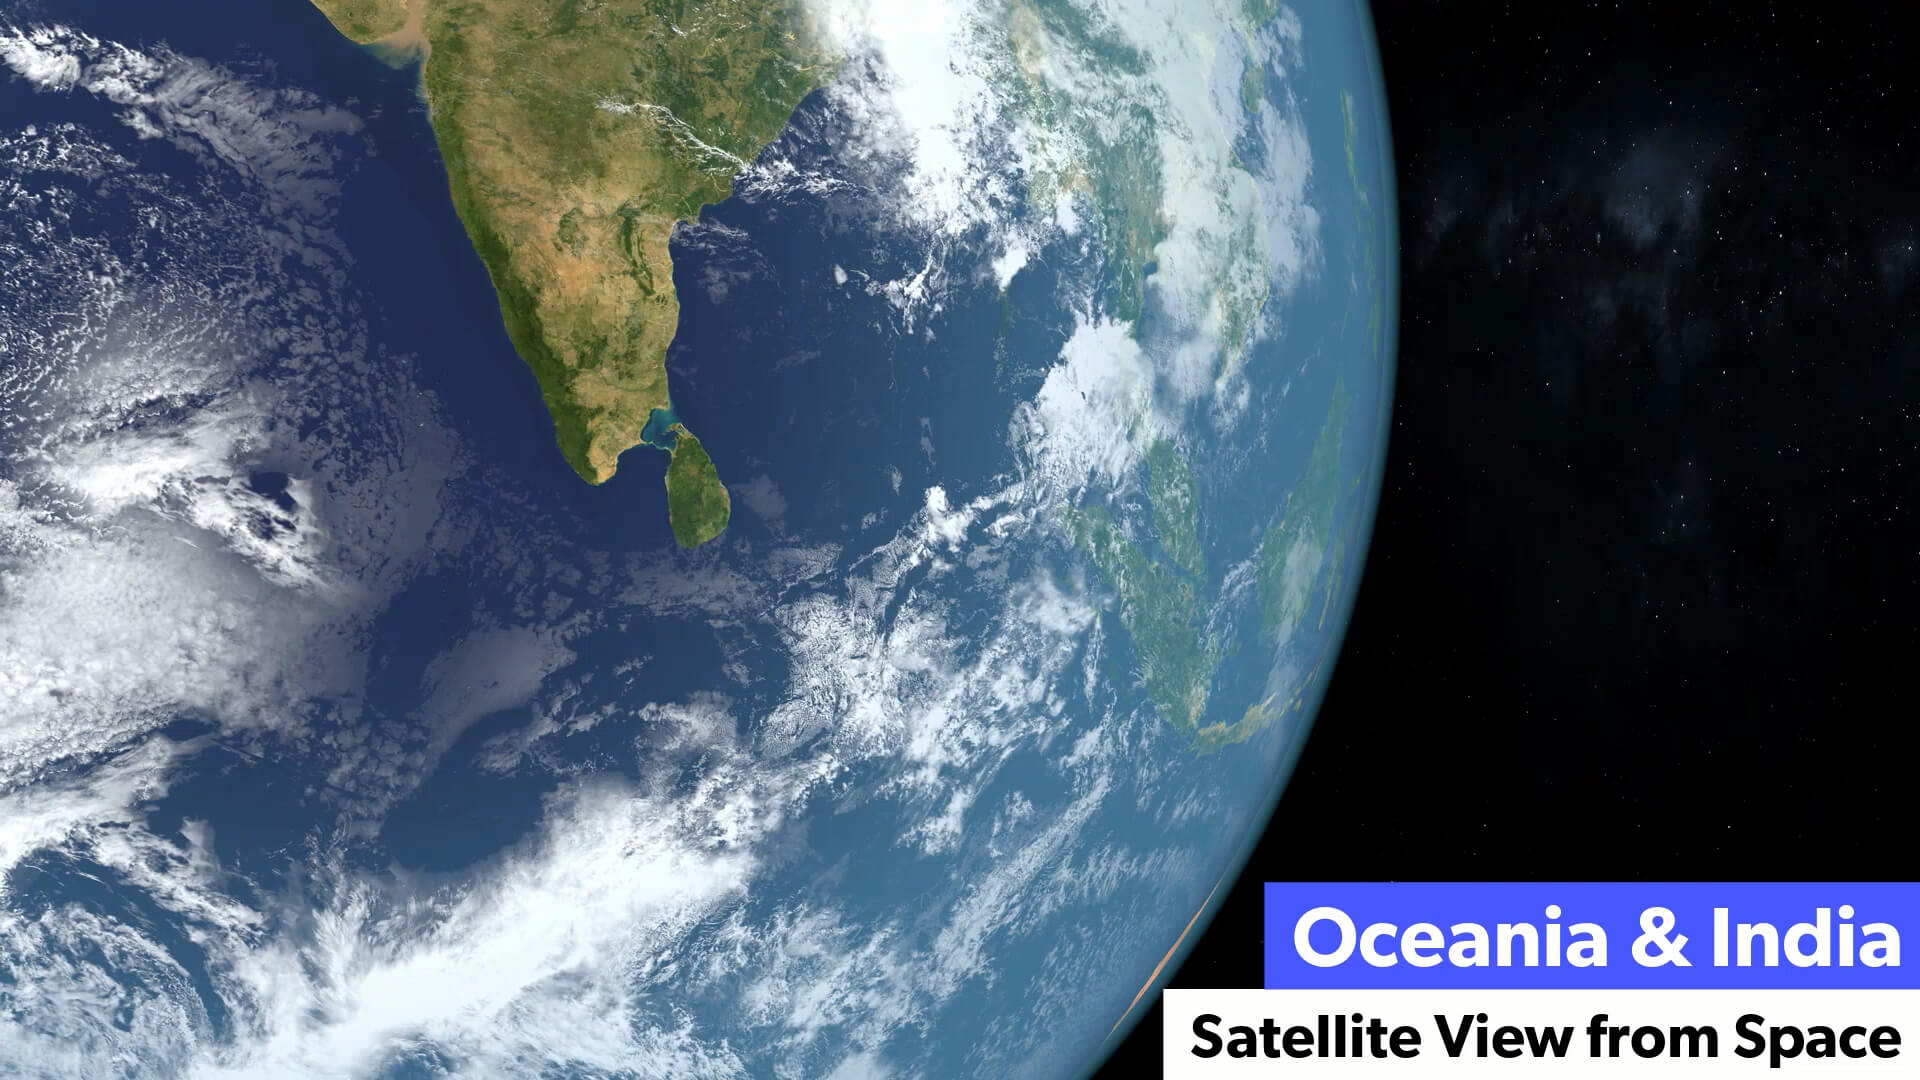 Oceania and India Satellite View from Space